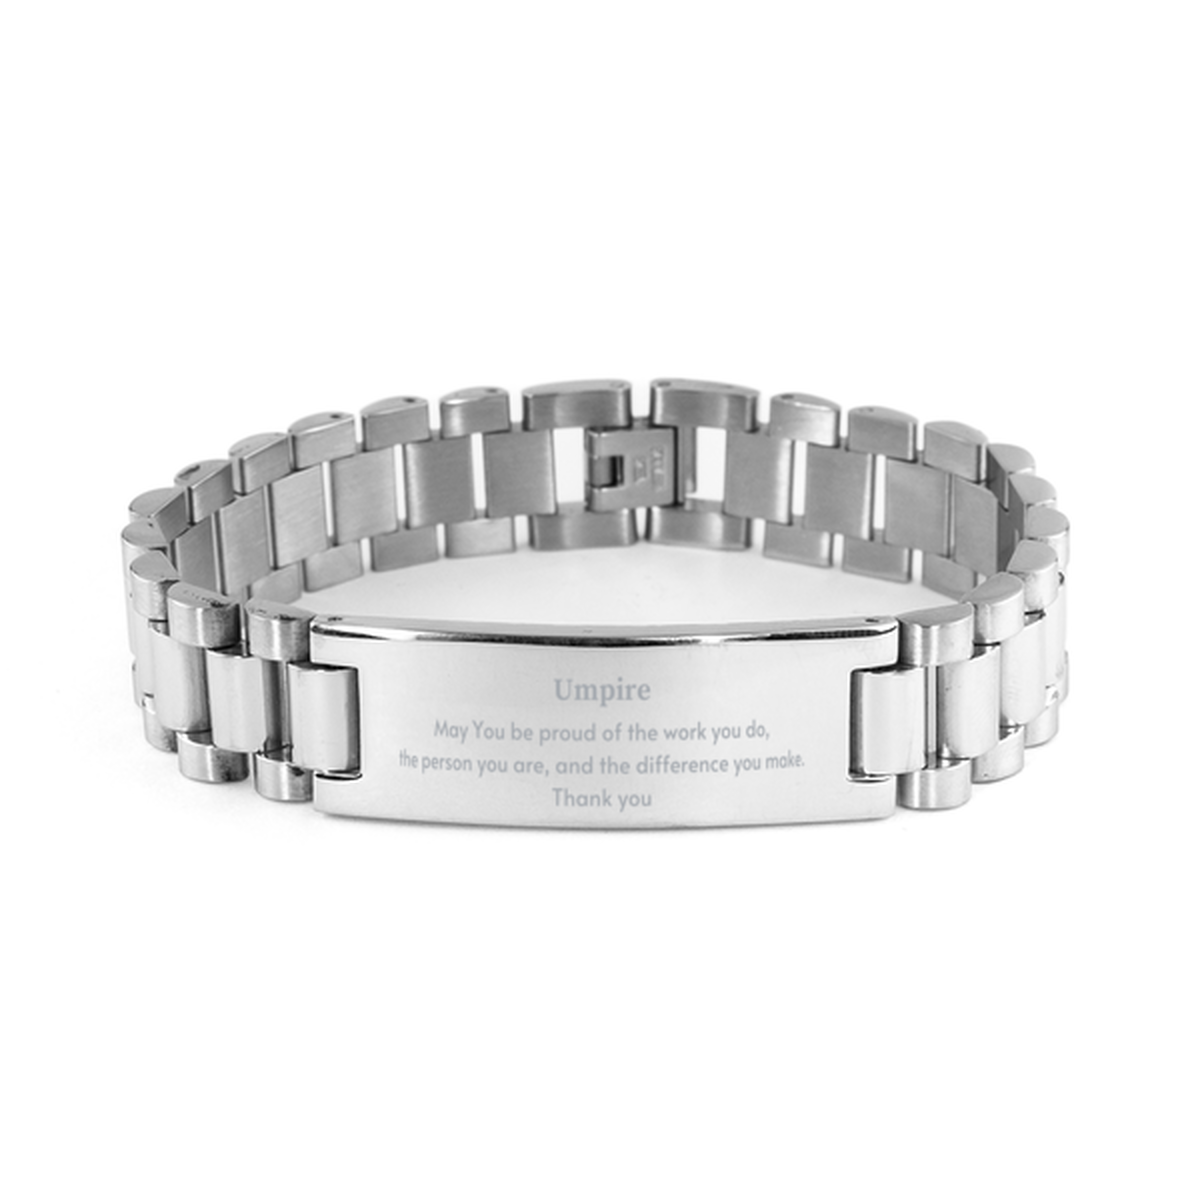 Heartwarming Ladder Stainless Steel Bracelet Retirement Coworkers Gifts for Umpire, Umpire May You be proud of the work you do, the person you are Gifts for Boss Men Women Friends